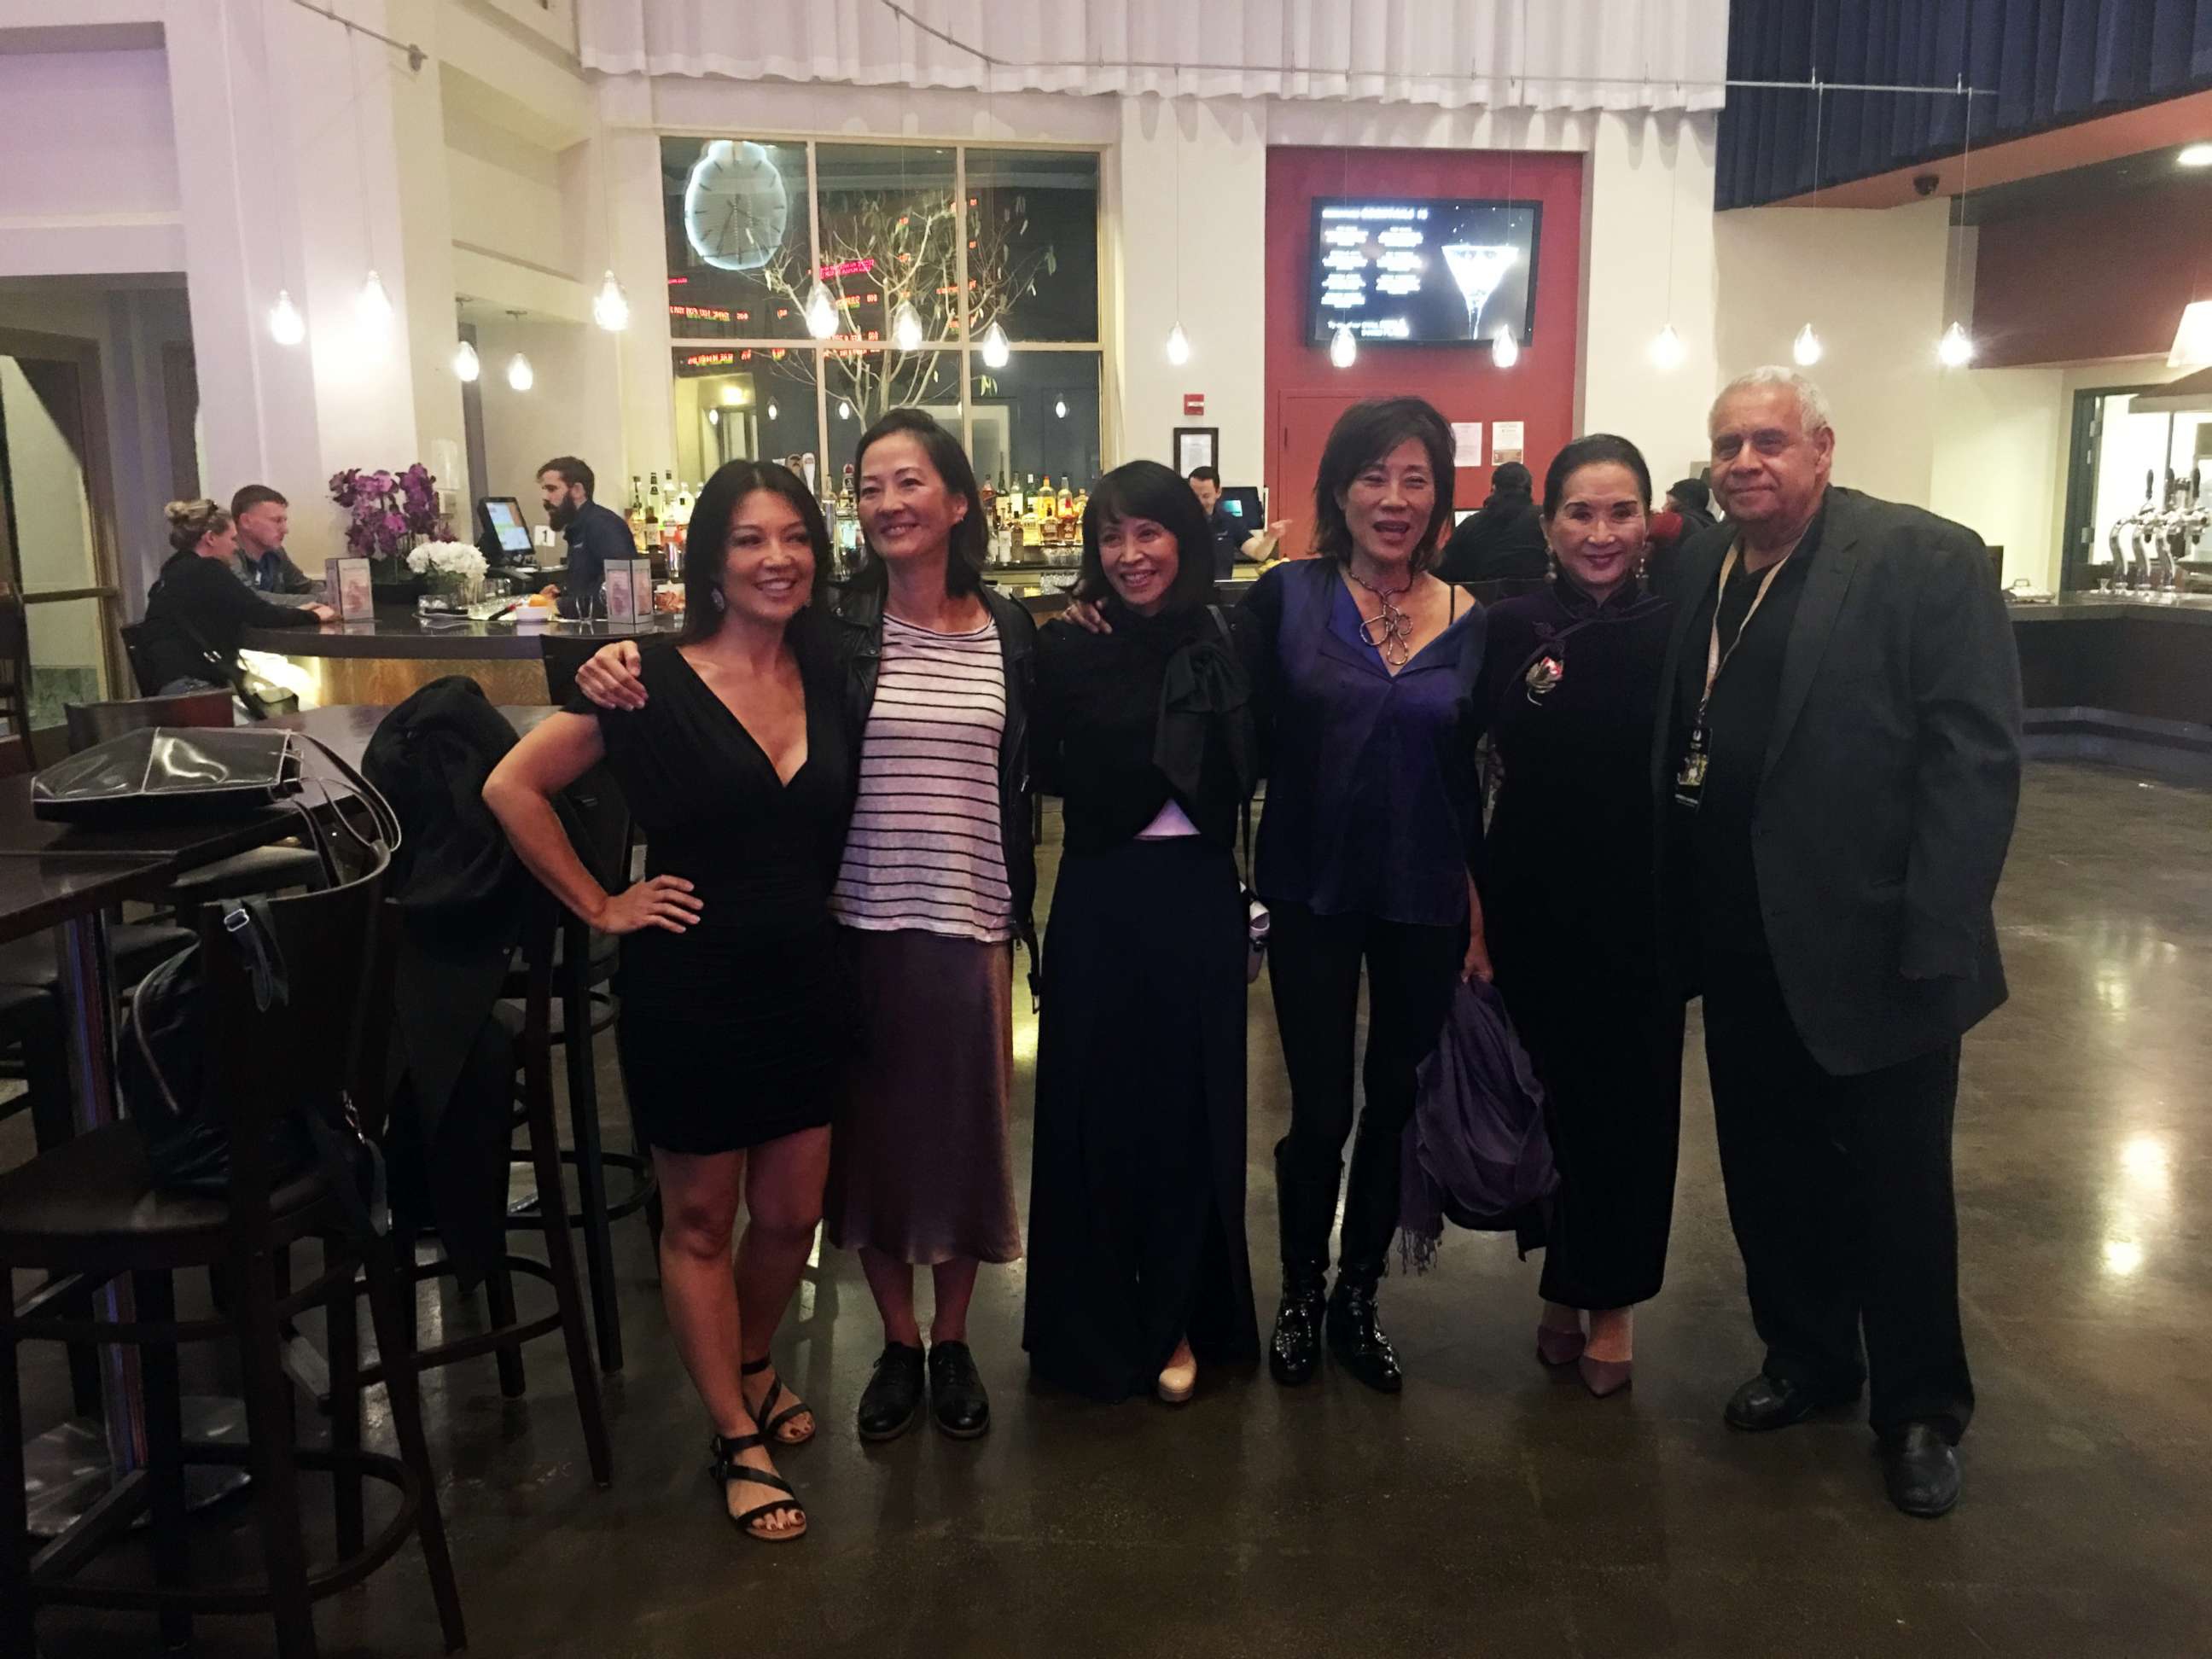 PHOTO: "The Joy Luck Club" stars Tamlyn Tomita, Rosalind Chao, Lauren Tom and Lucille Soong are pictured with the film's executive producer Janet Yang at the Asian World Film Festival in 2017.